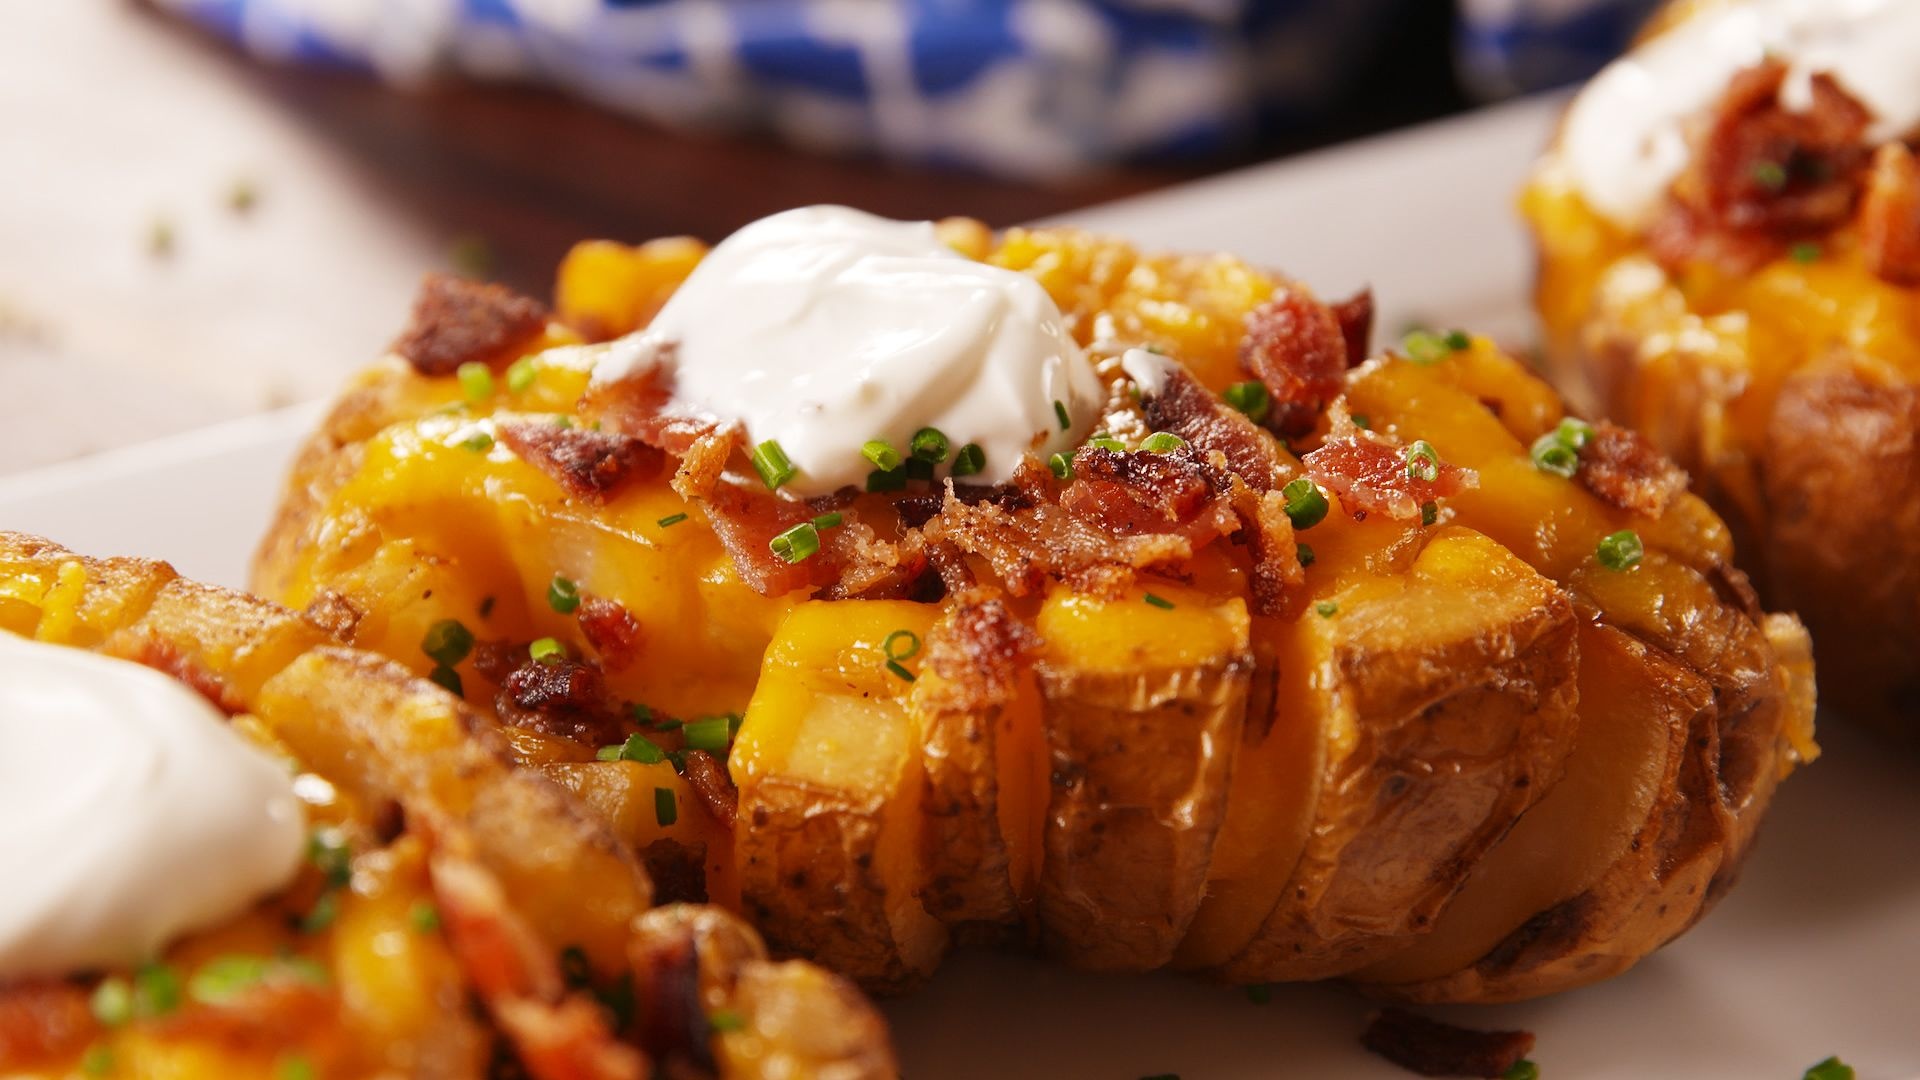 Baked potato recipe, Mouthwatering presentation, Irresistible flavors, Perfectly cooked, 1920x1080 Full HD Desktop